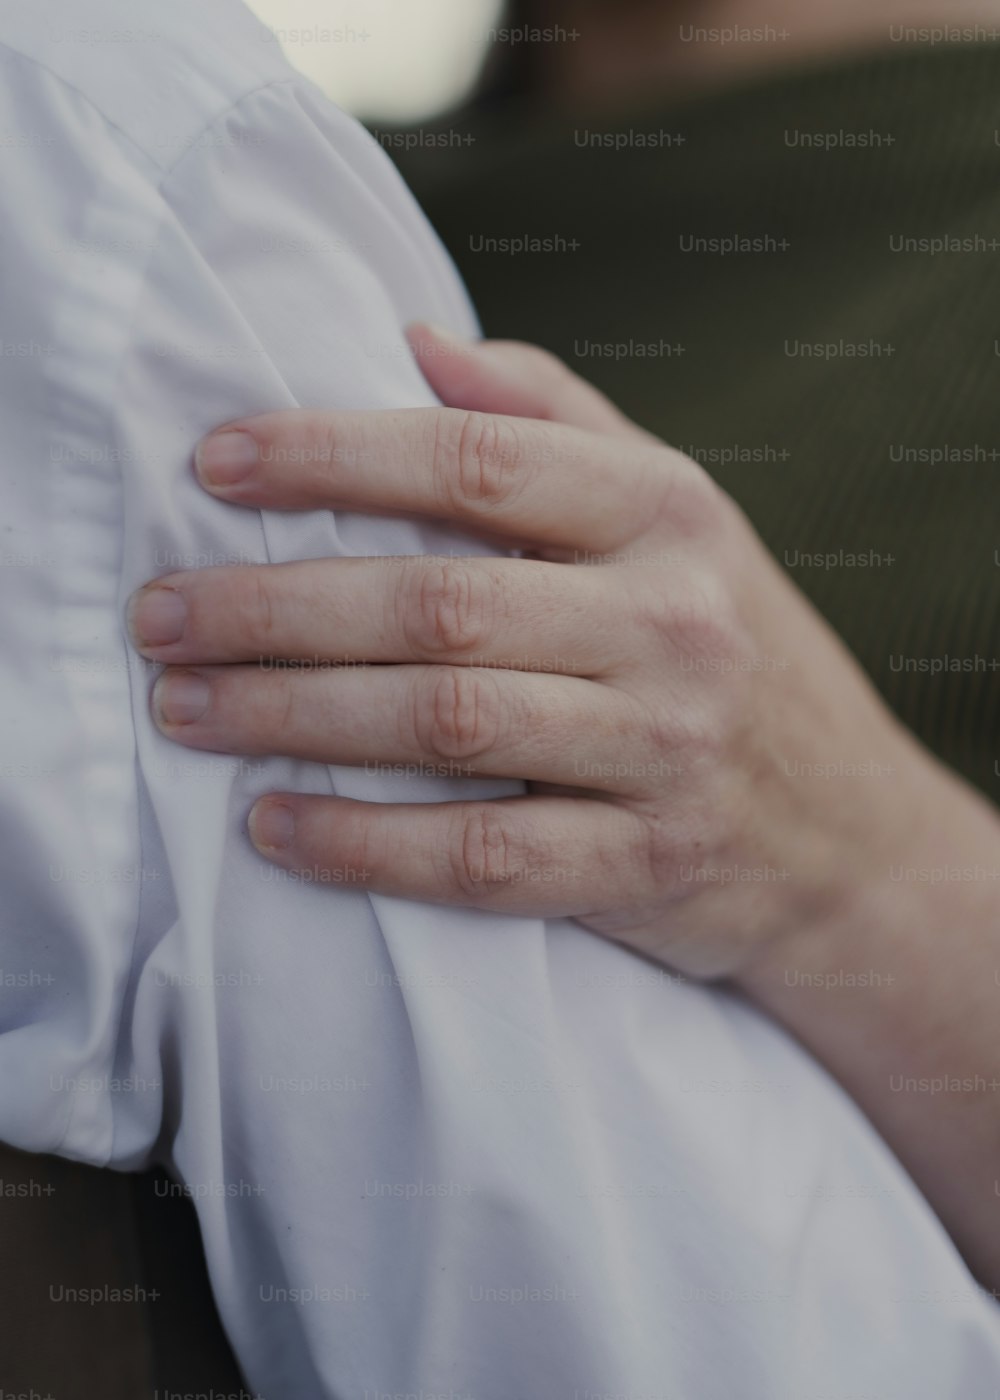 a close up of a person's hands holding a pillow